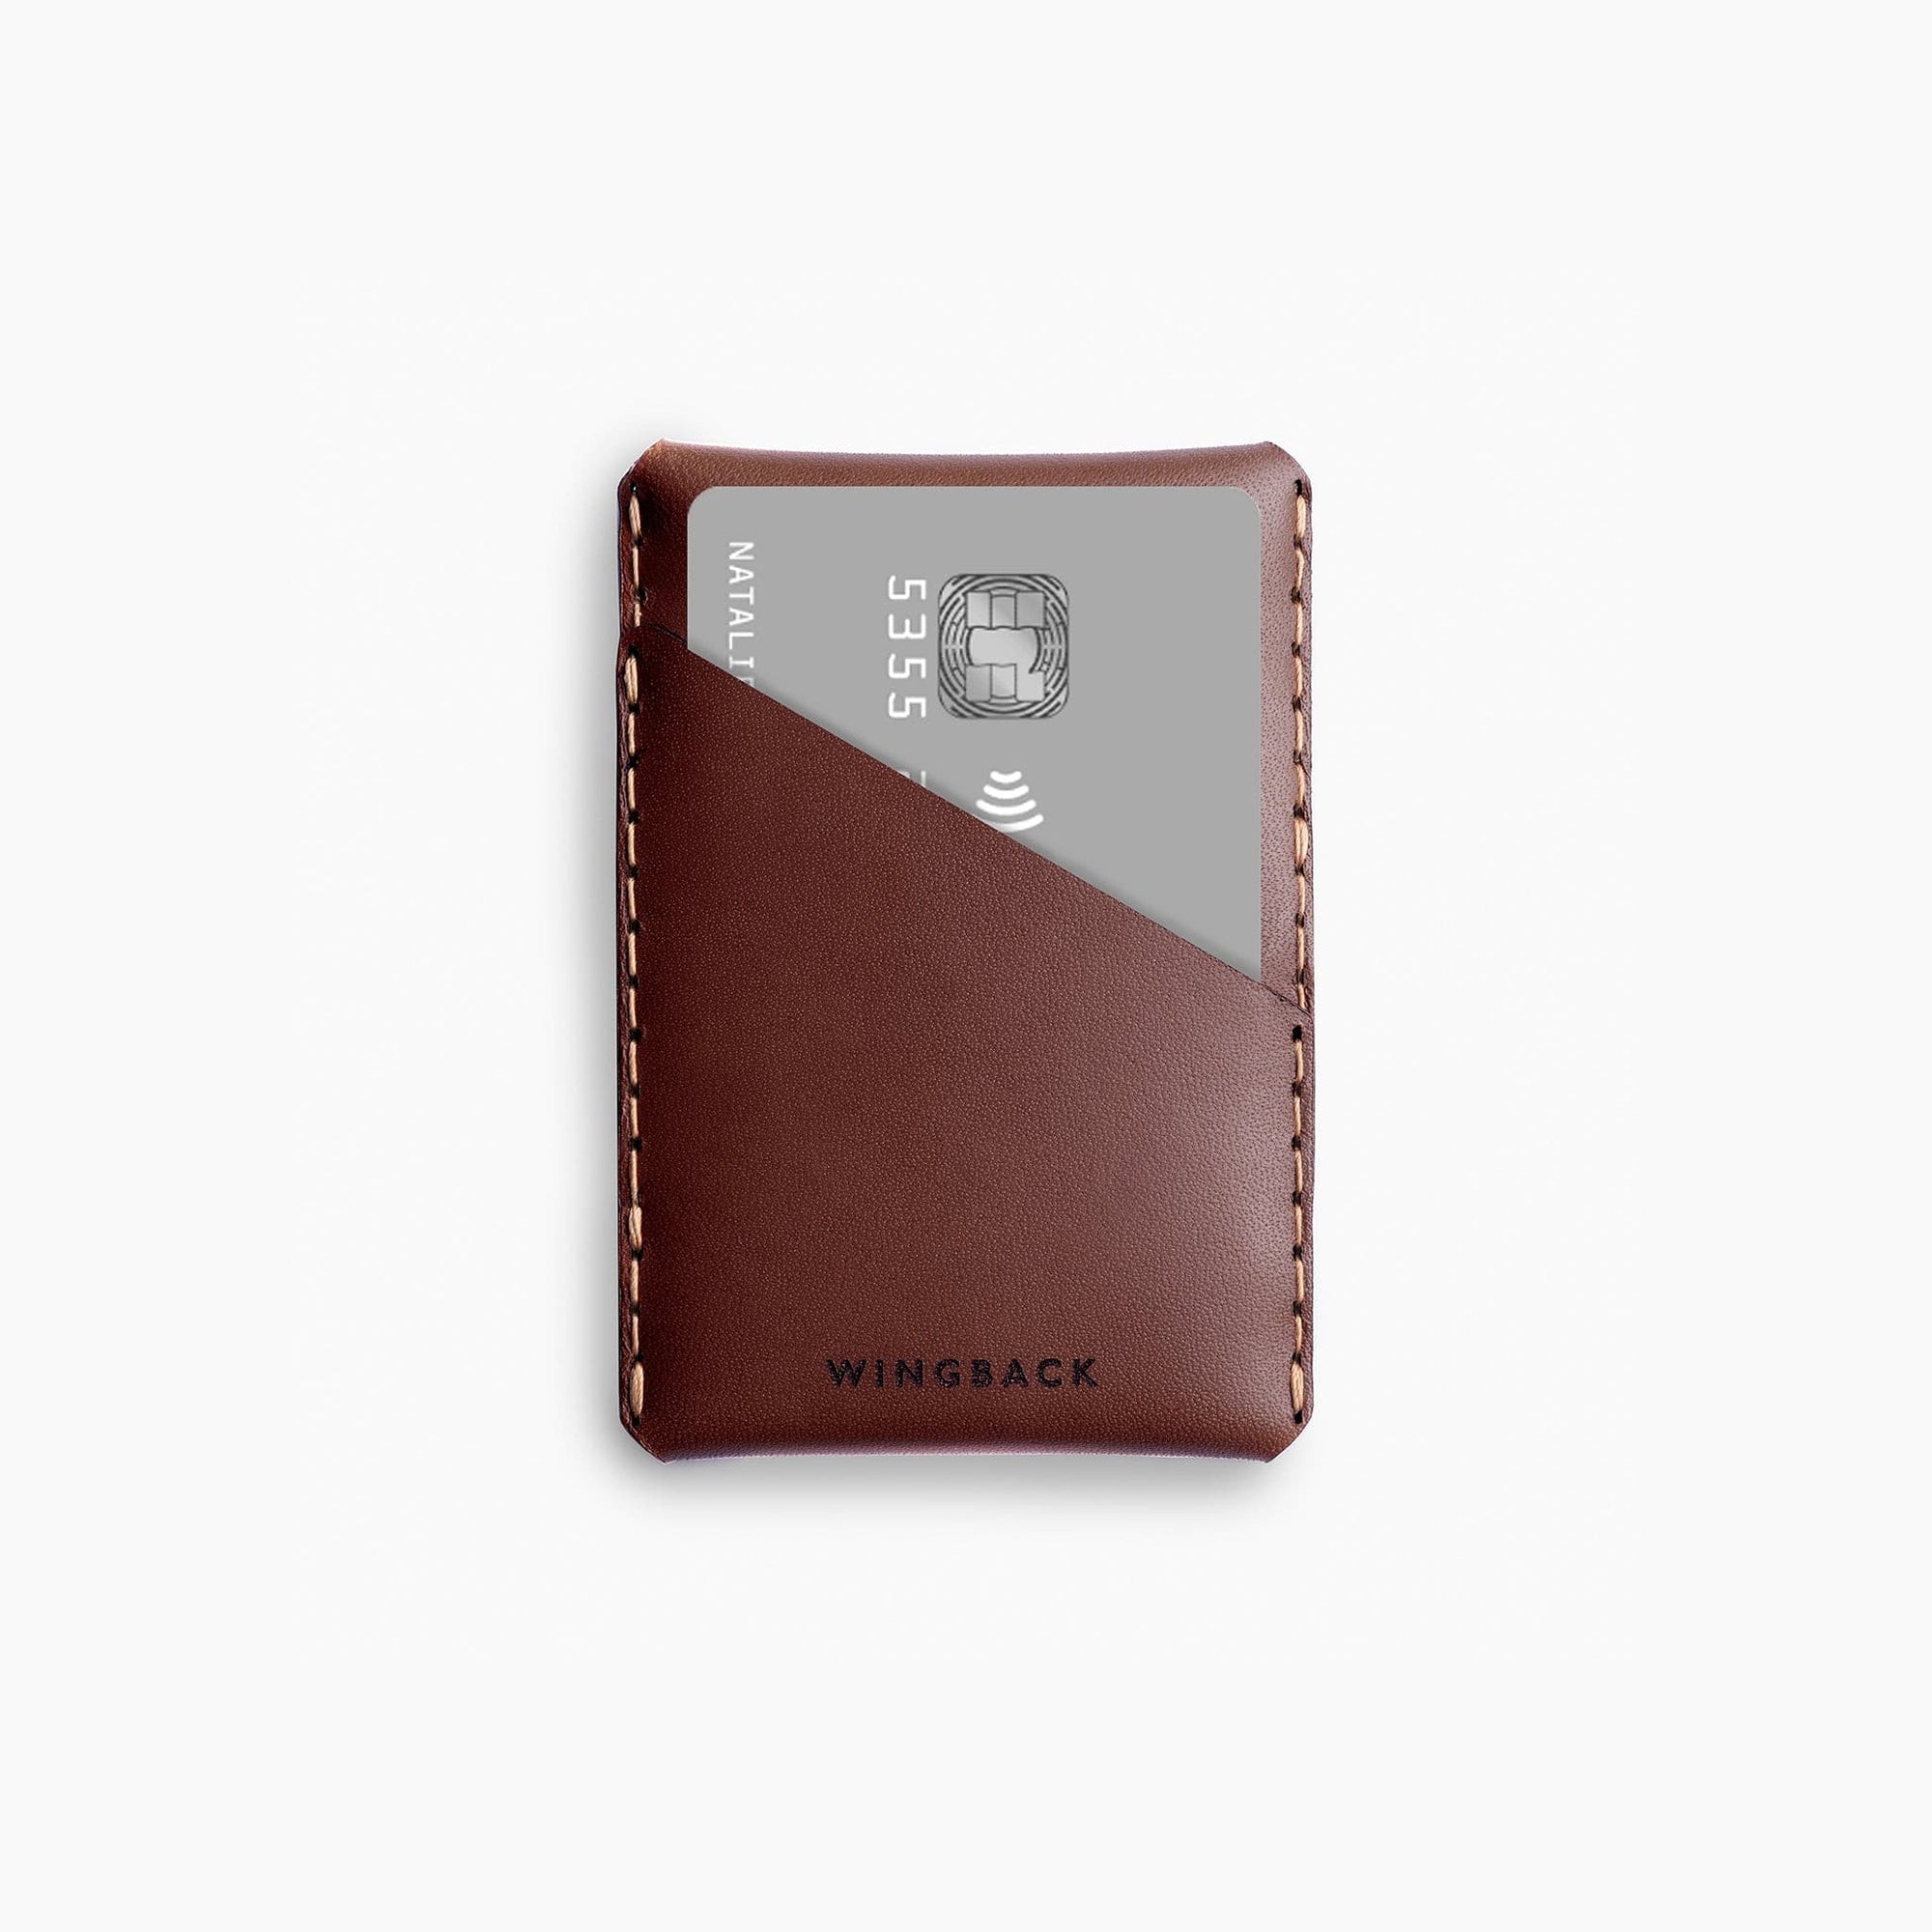 Wingback Wingston CardHolder - Dual Symmetrical Pockets - Storming Gravity